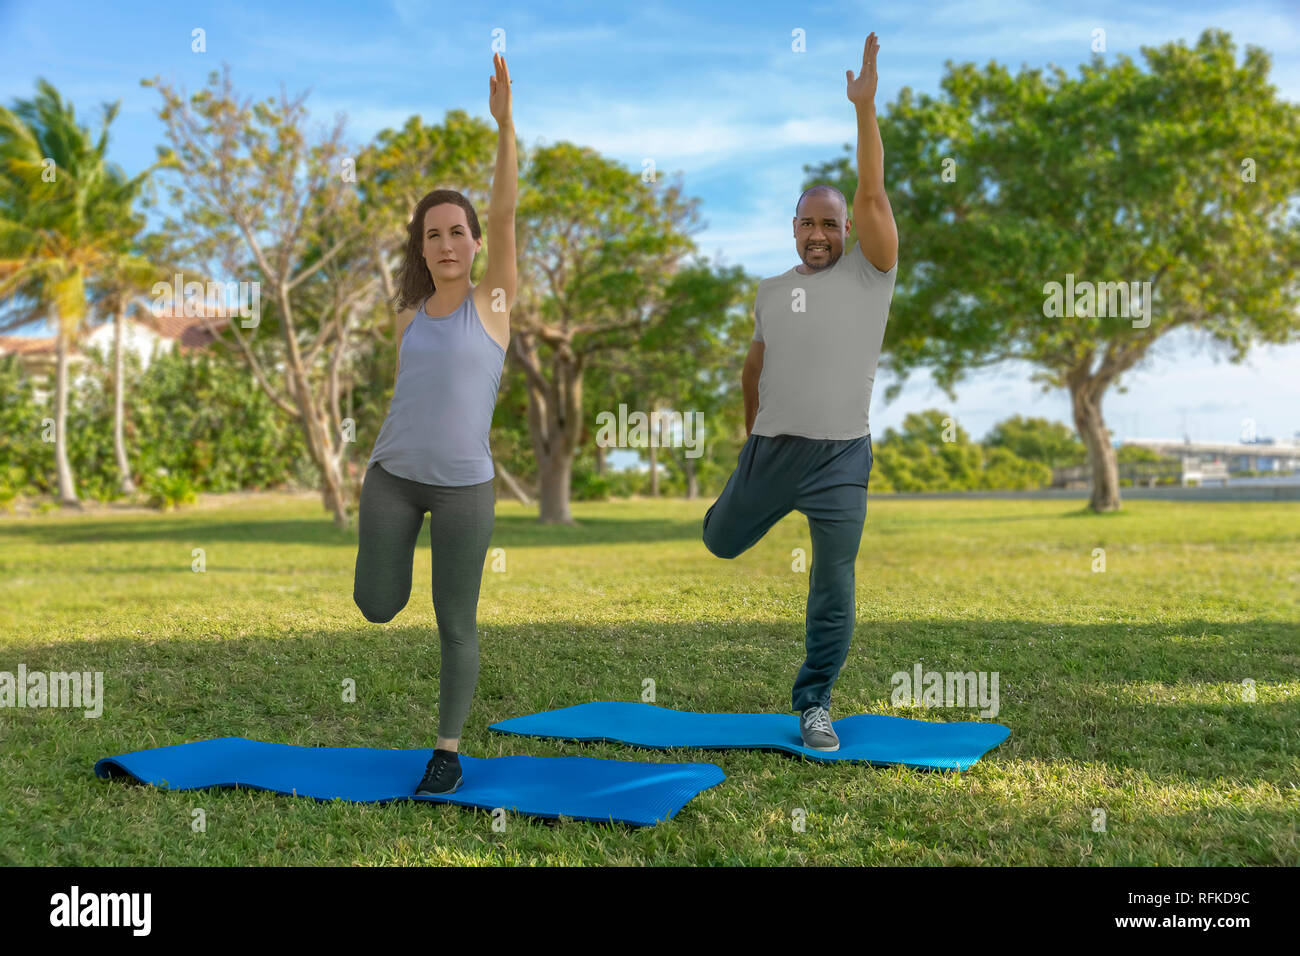 They start by standing on one leg holding the other back and reaching up high with the other hand to balance themselves on yoga mats exercising. Stock Photo